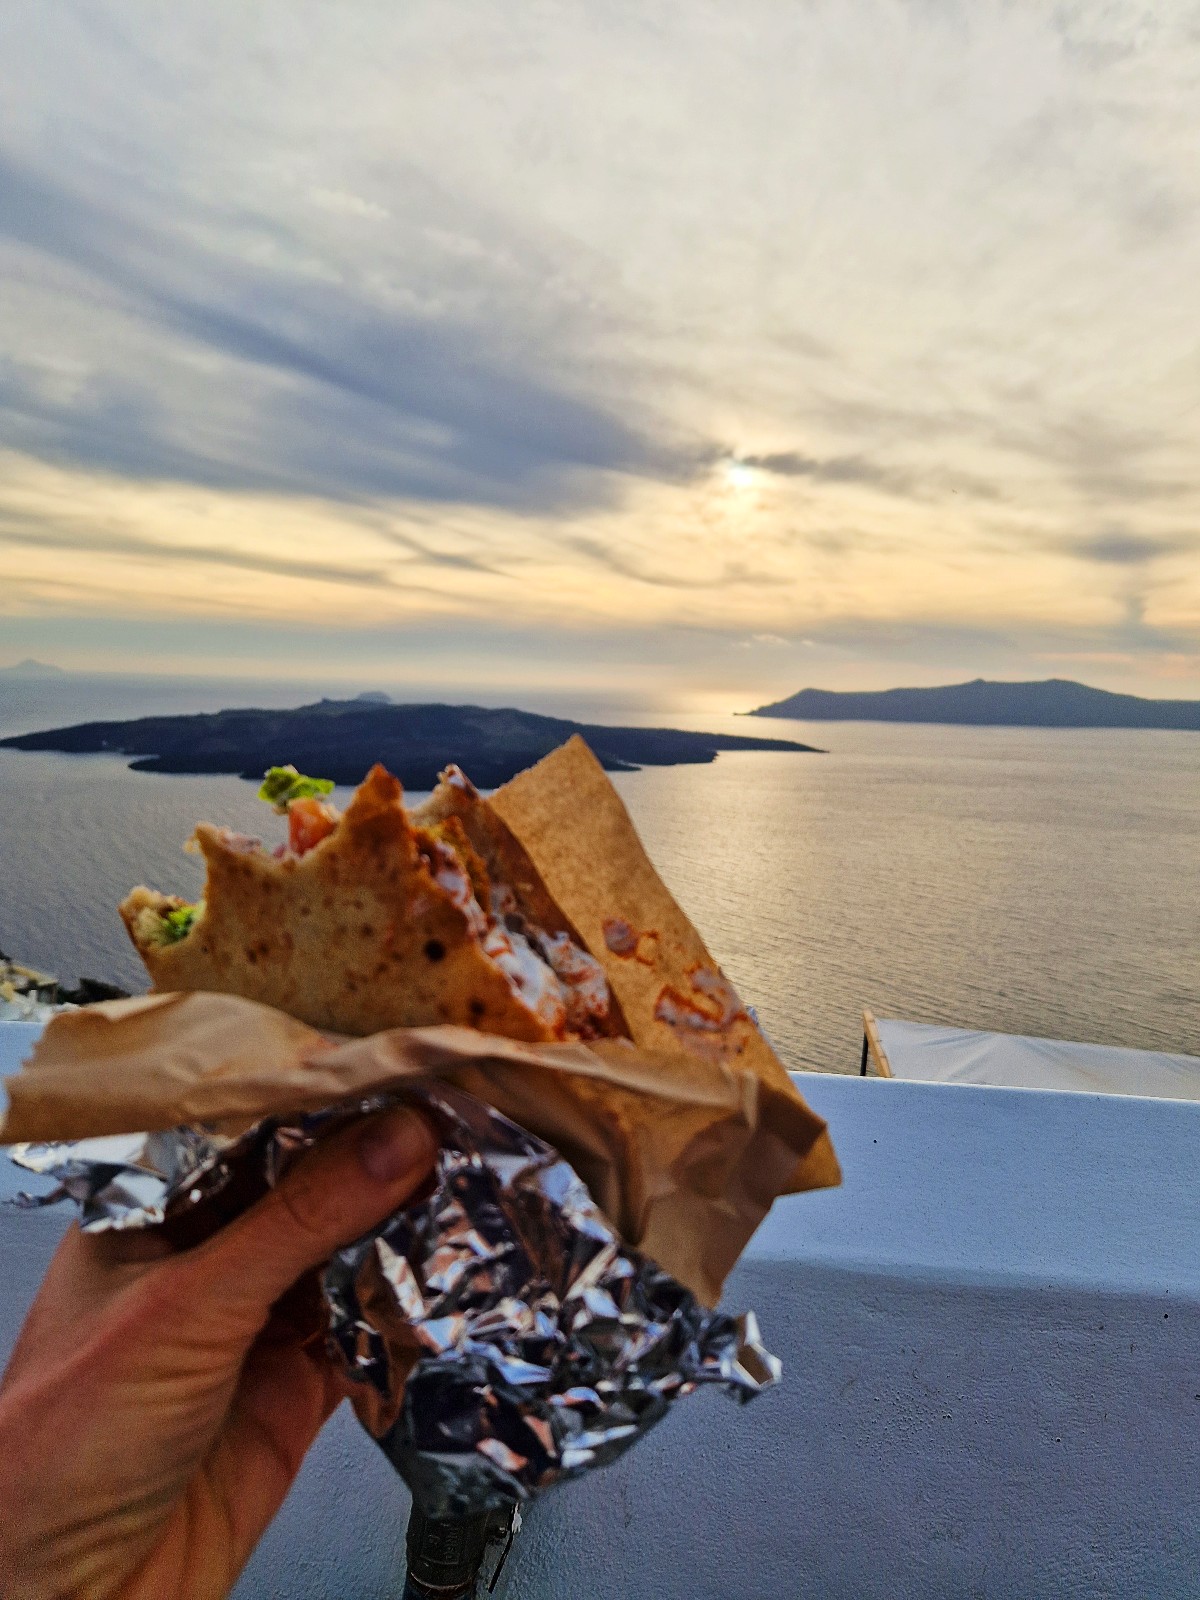 Eating on a budget in Santorini